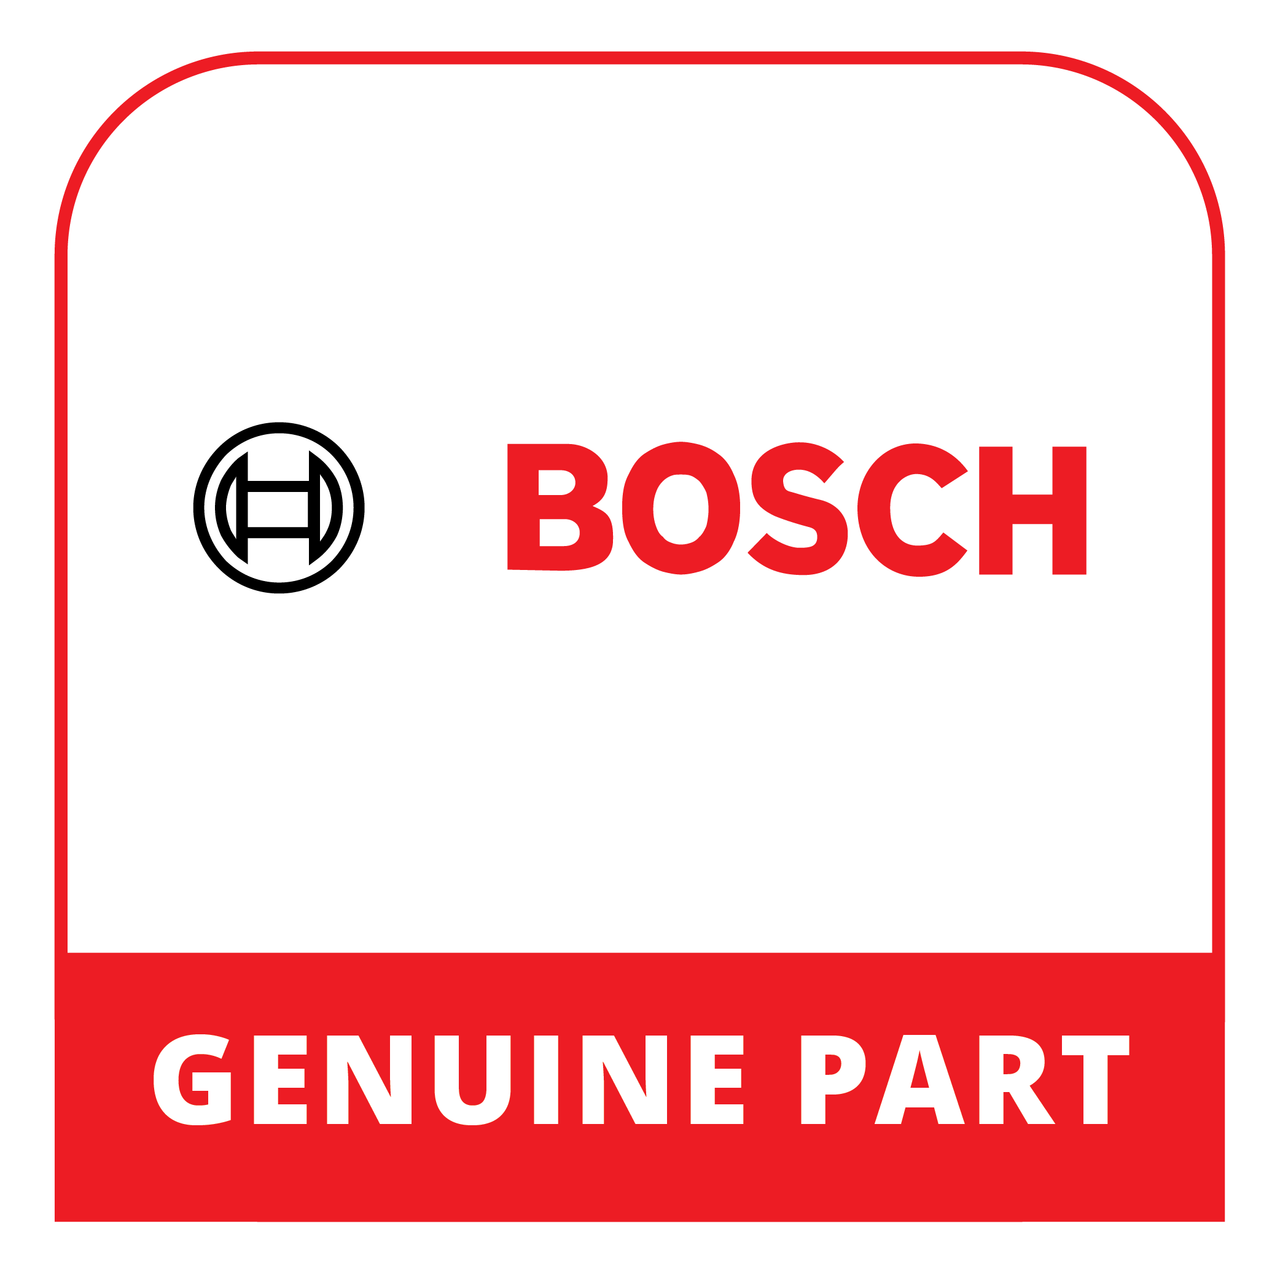 Bosch (Thermador) 11029612 - Drawer Front - Genuine Bosch (Thermador) Part